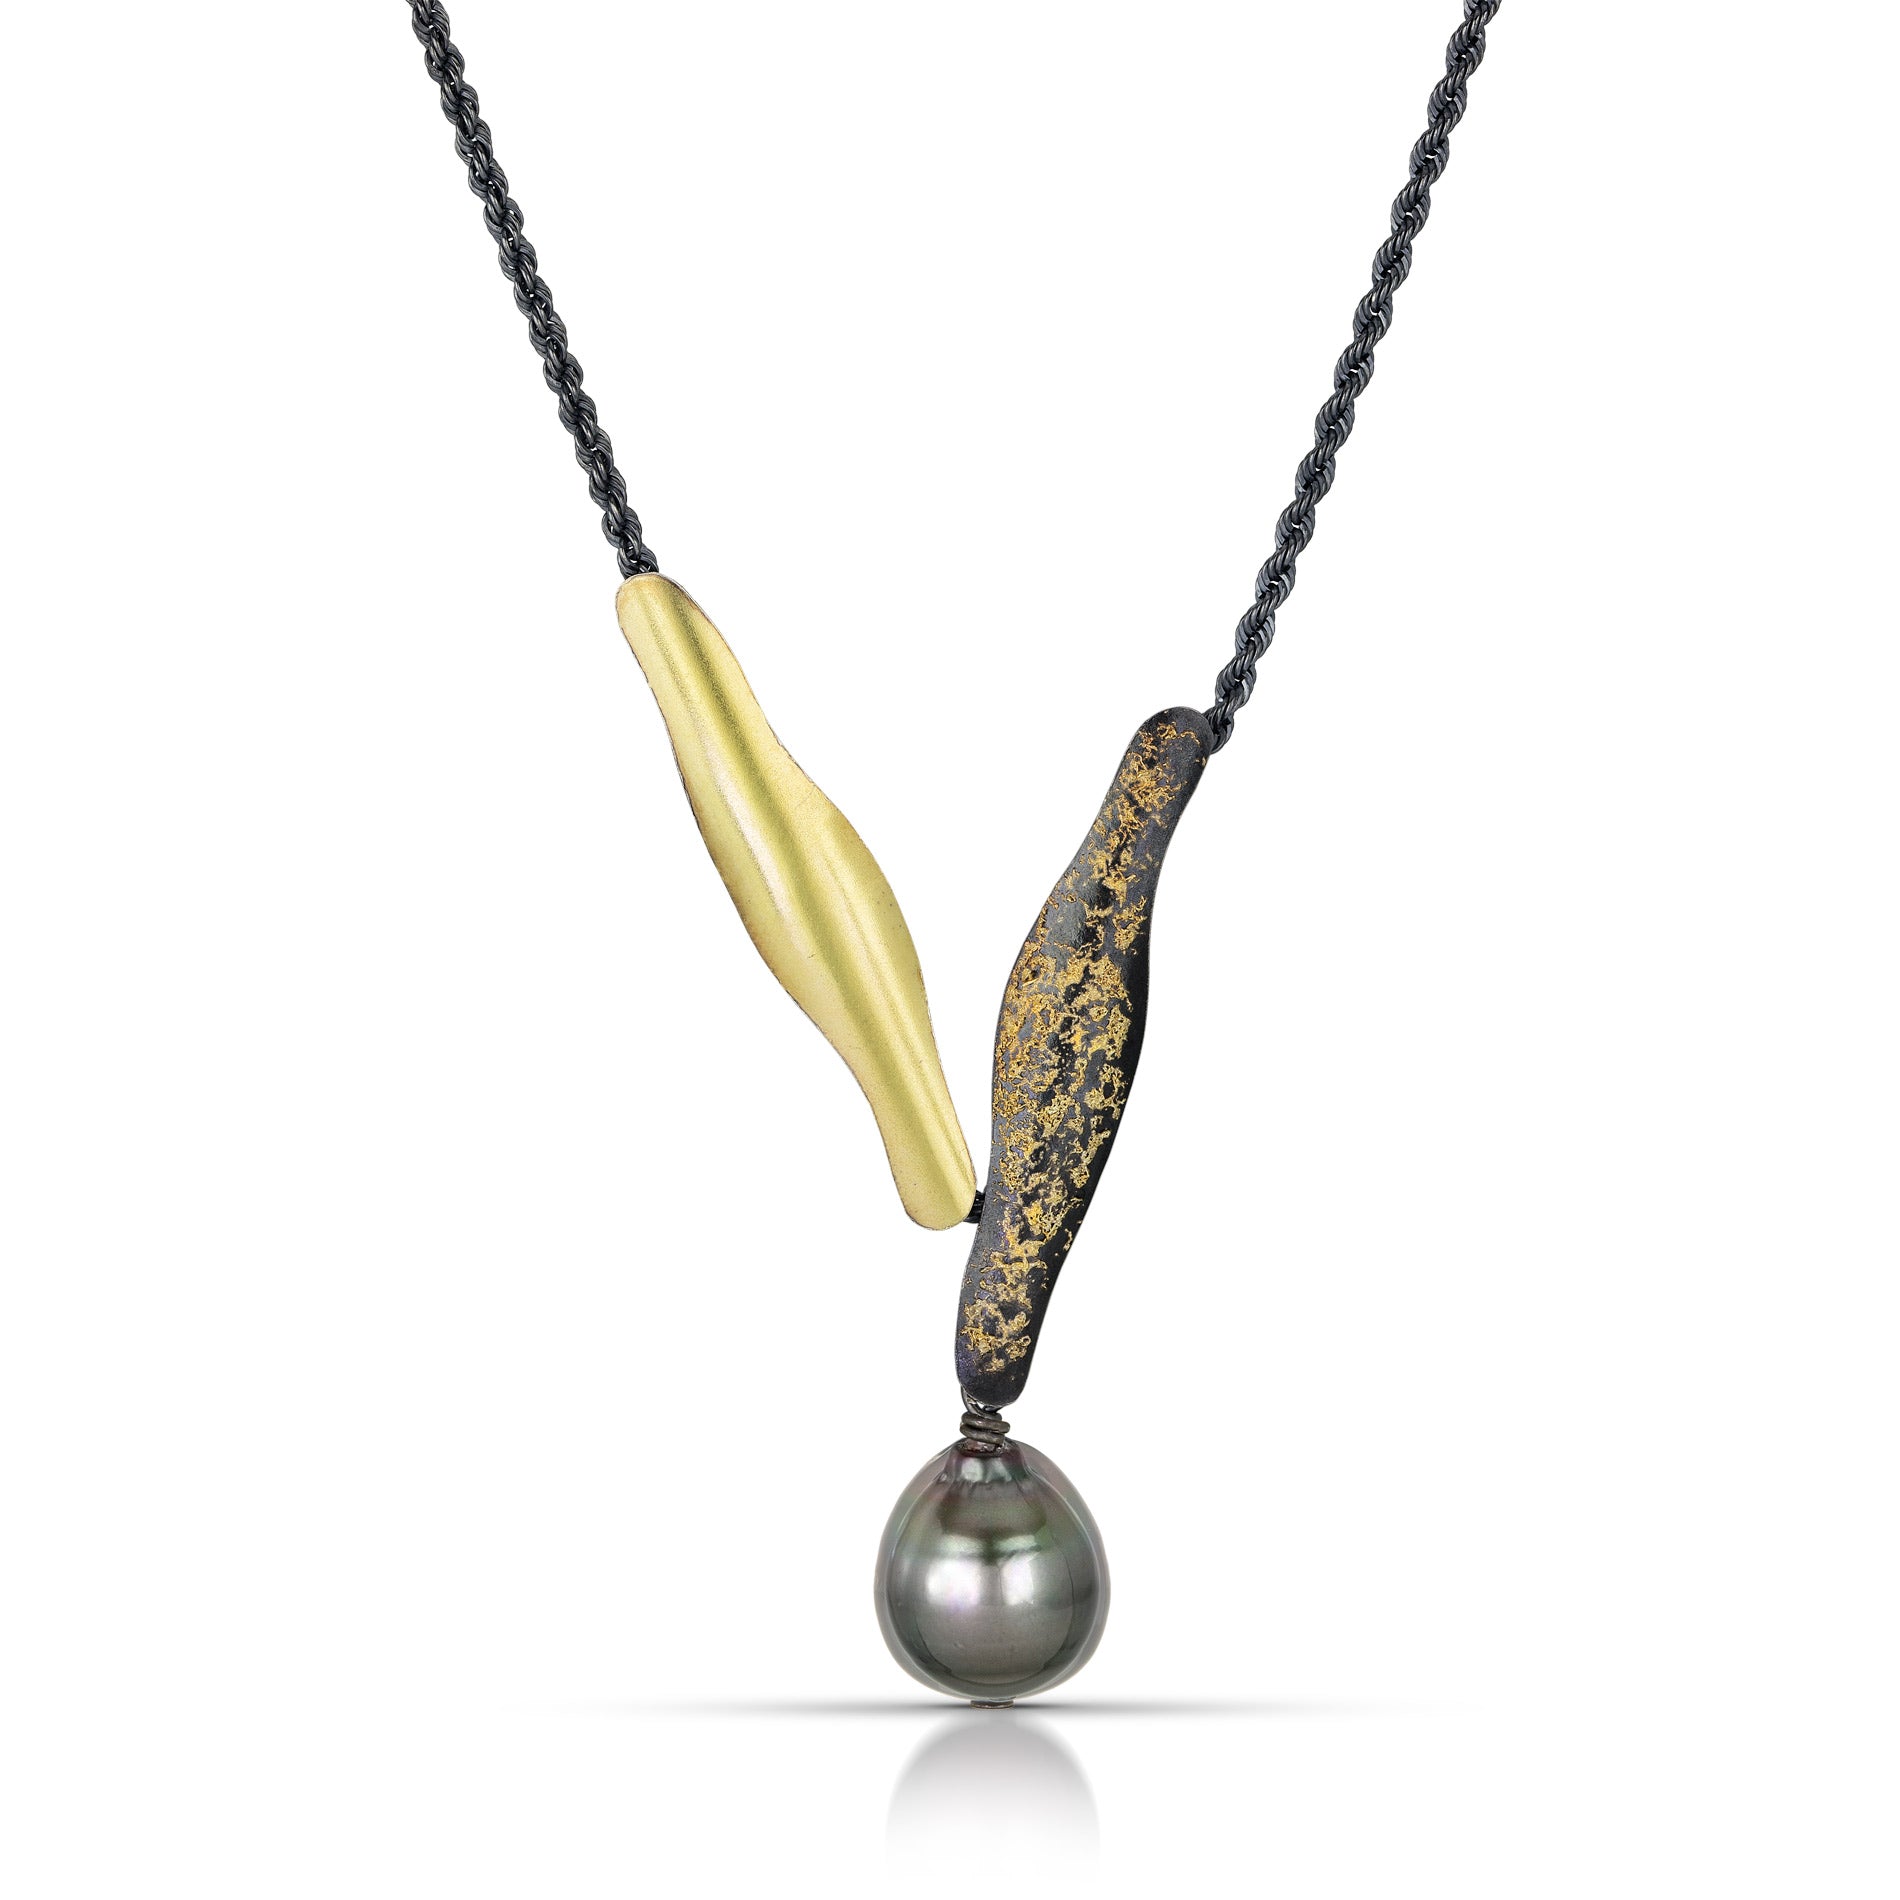 Suzanne Schwartz Feng Shui Tahitian Pearl Necklace